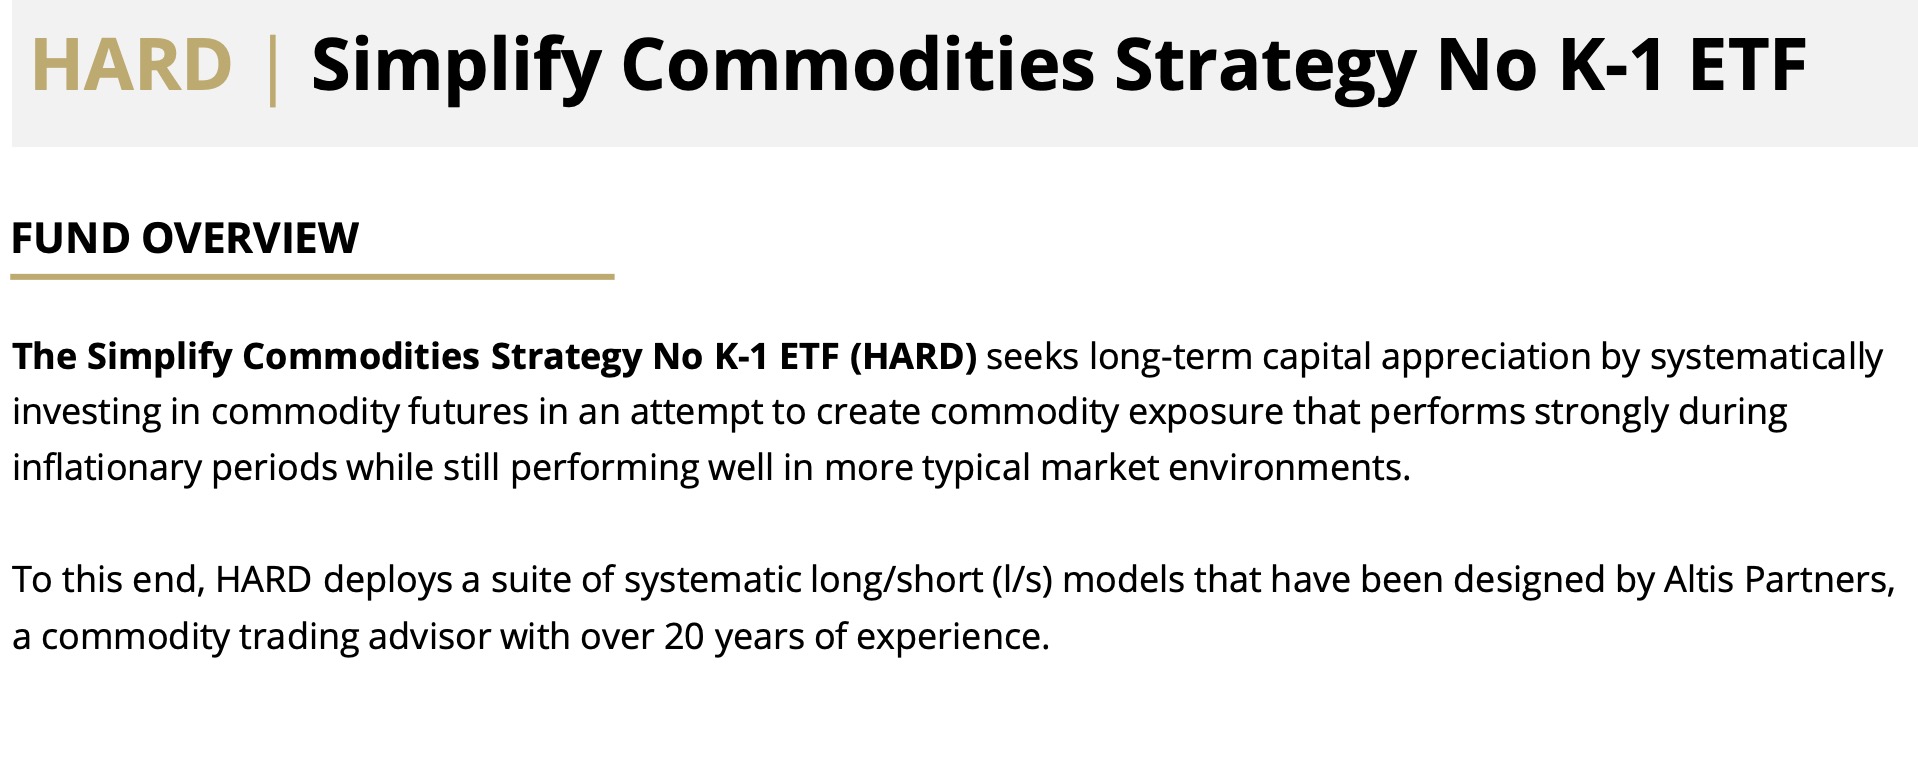 HARD ETF Simplify Commodities Strategy No K-1 ETF Fund Overview